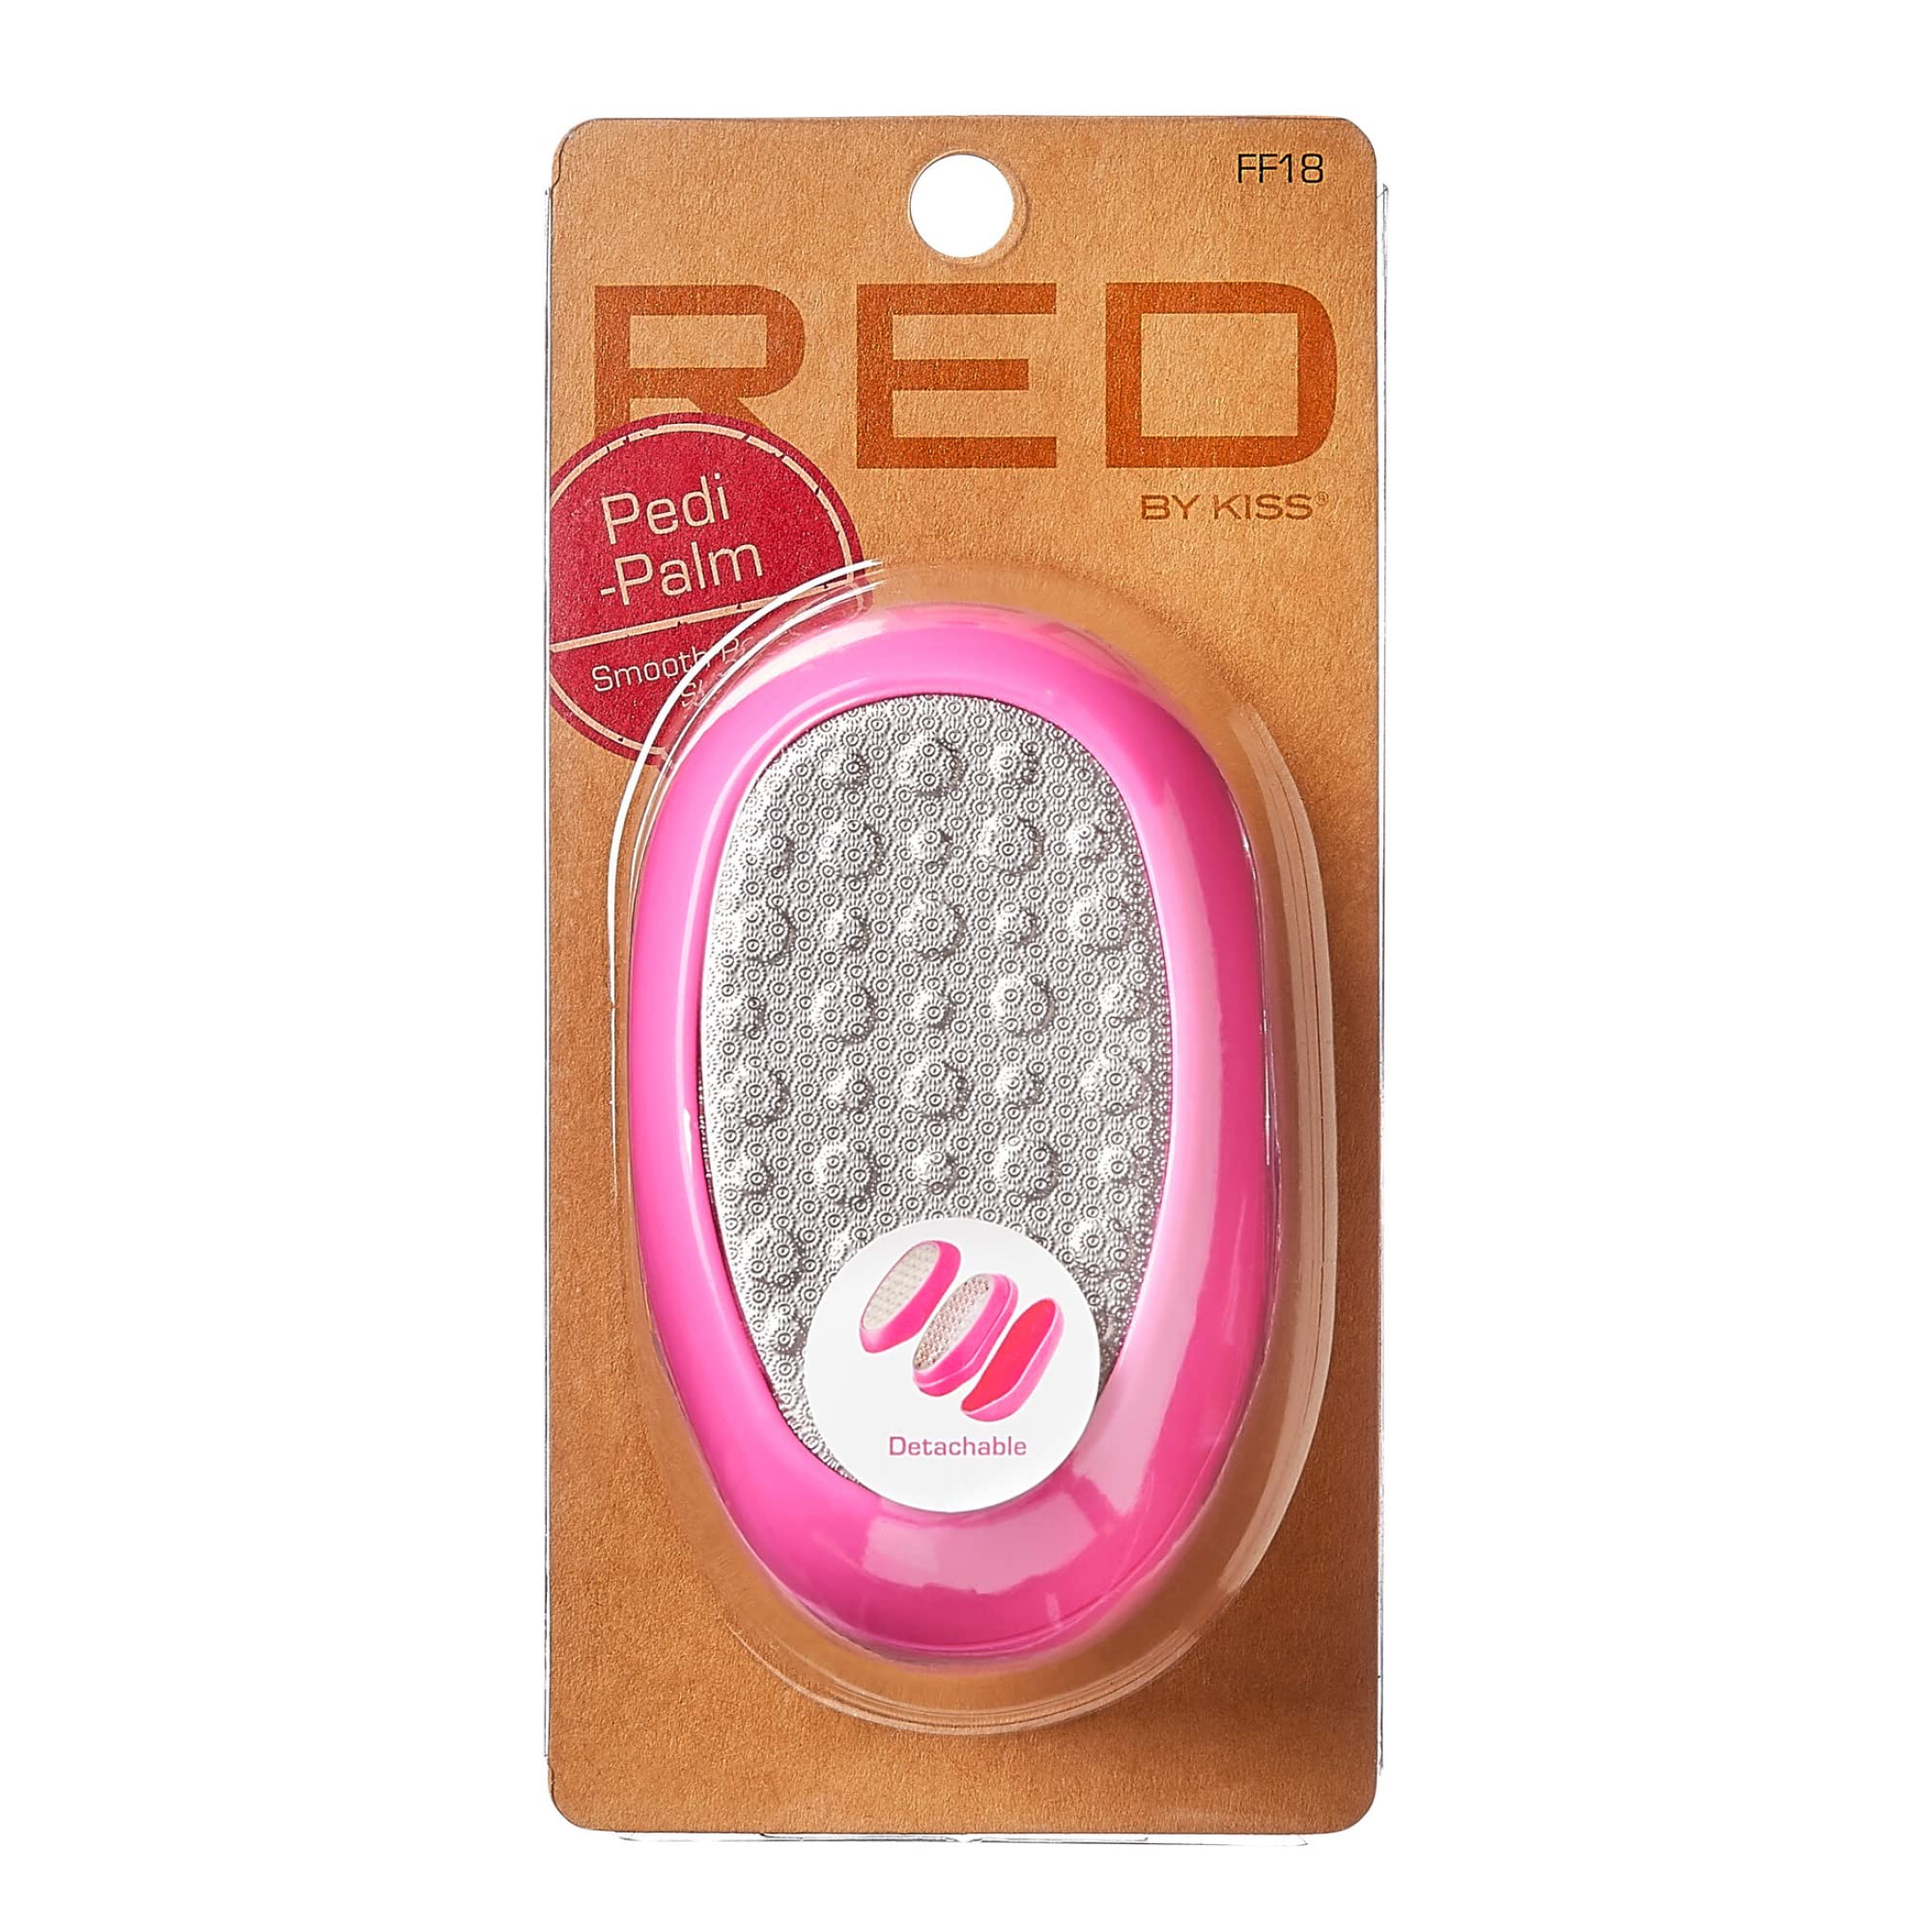 RED by Kiss Stainless Steel Ped Egg Foot File 2 in-1 Callus